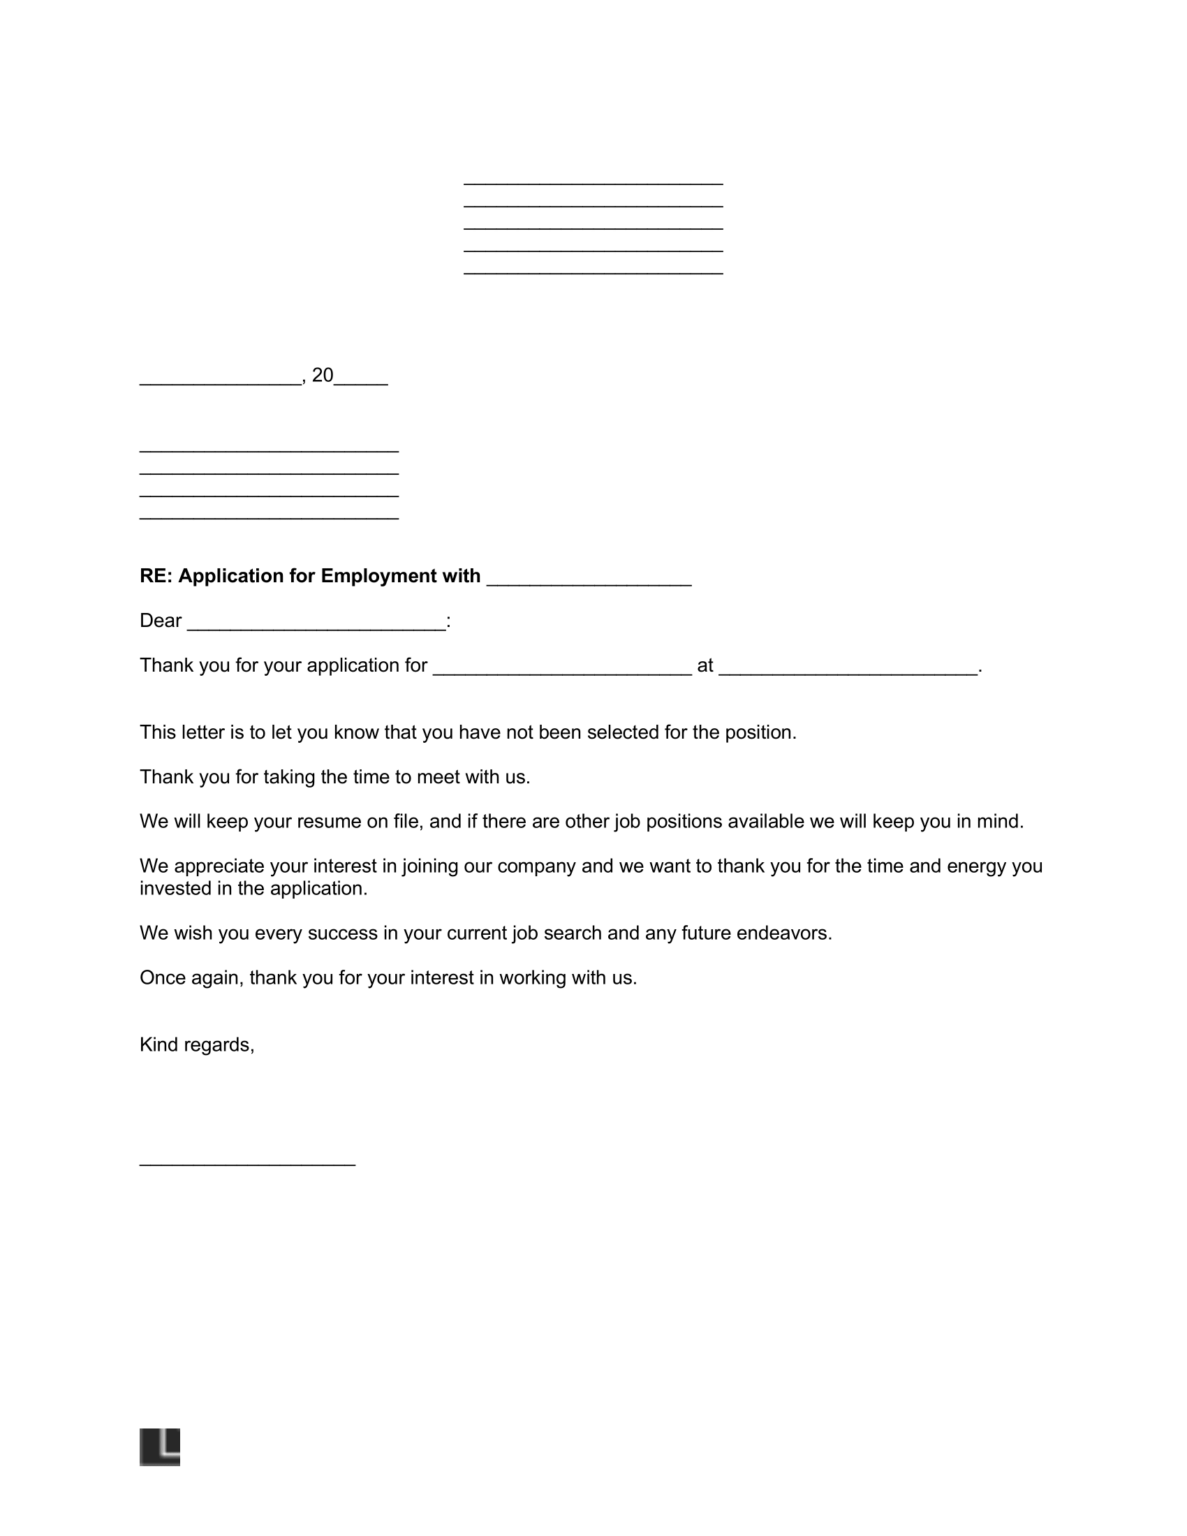 job rejection email keep resume on file